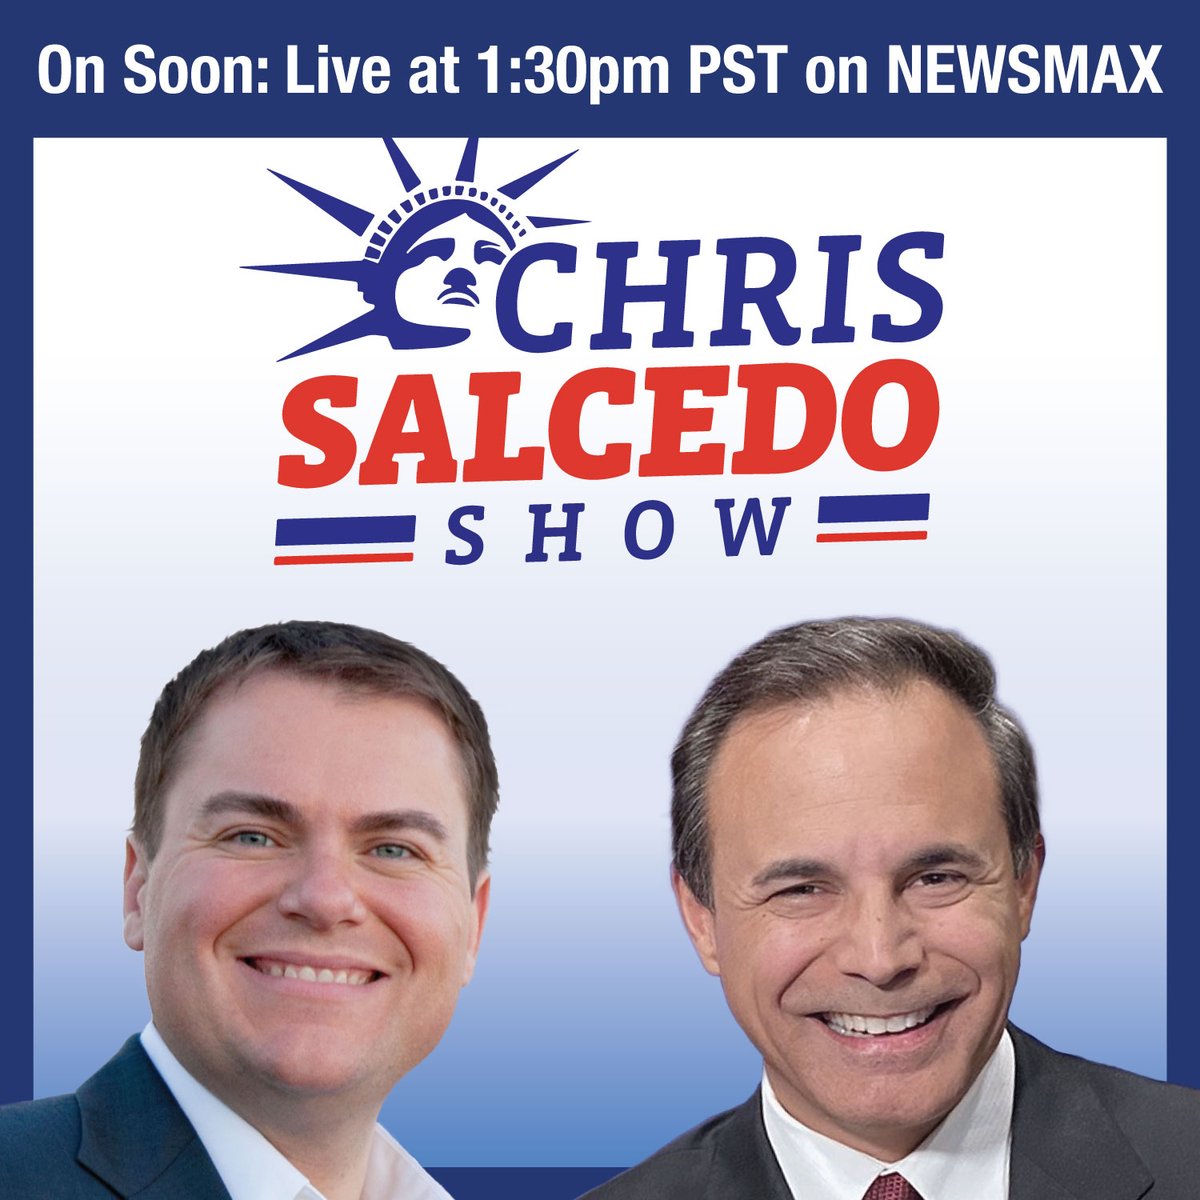 TODAY at 1:30PM: I'll be on “The Chris Salcedo Show” on @NEWSMAX — watch as Chris & I discuss latest insanity in CA! Plus, what do YOU think is craziest thing CA politicians have done in last year? Let me know in the comments & I’ll cover “best of the worst” in my upcoming hit!